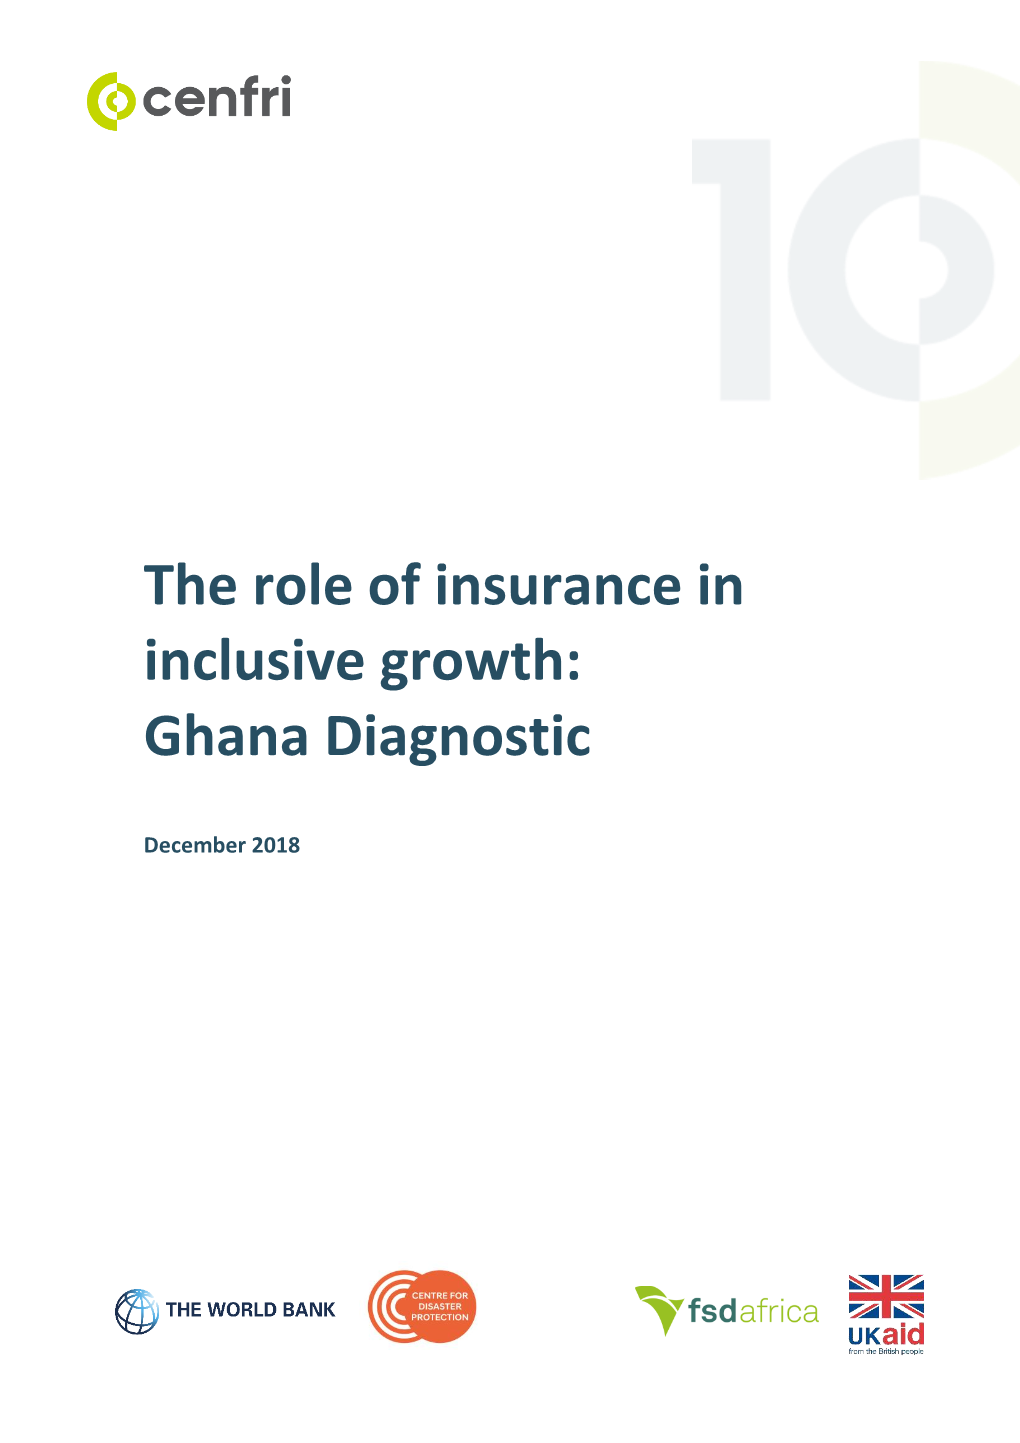 The Role of Insurance in Inclusive Growth: Ghana Diagnostic